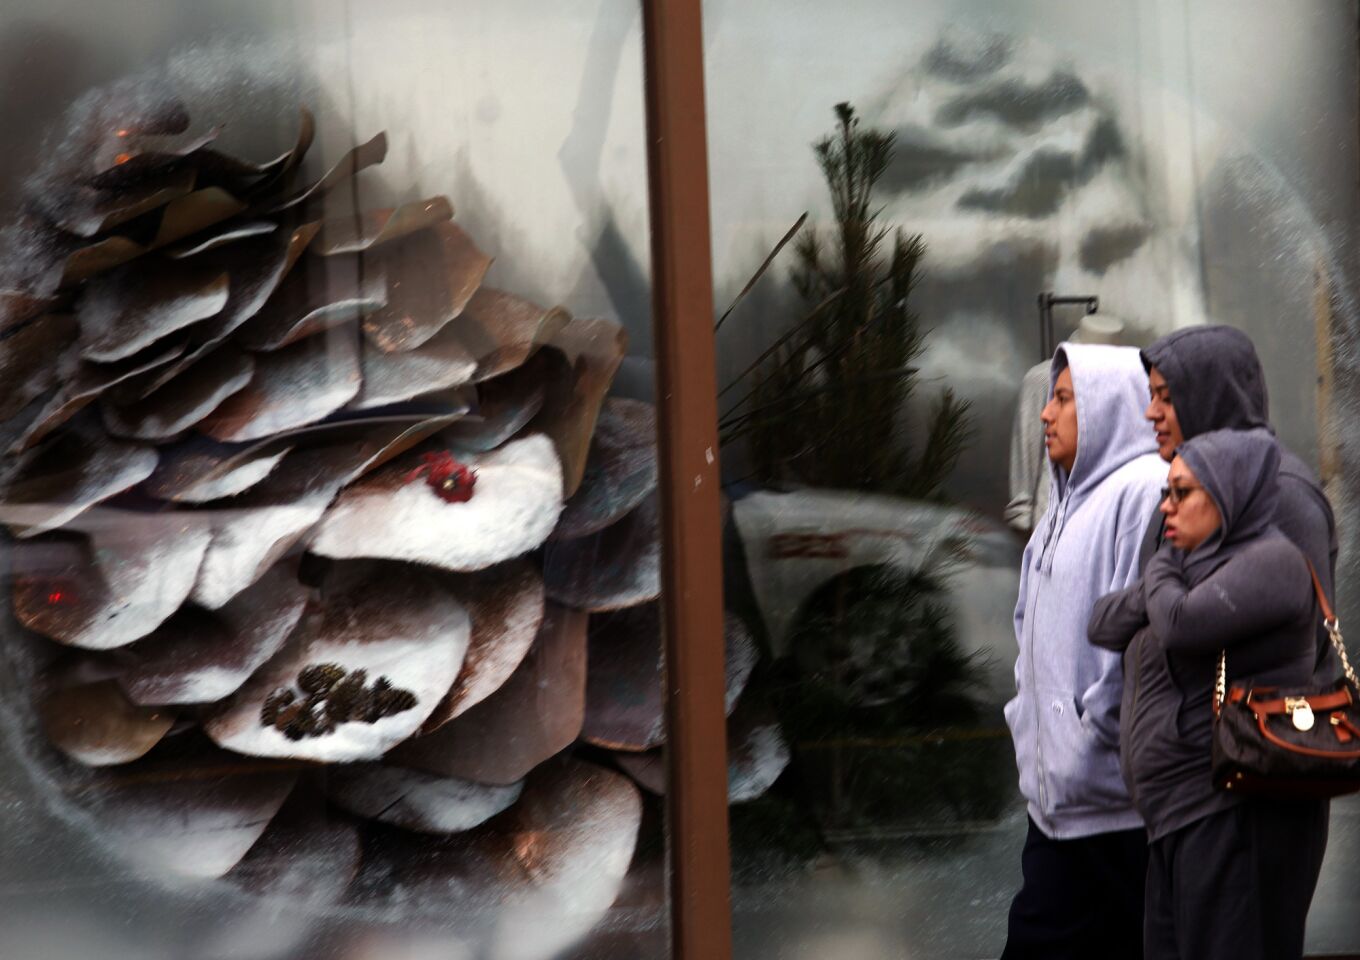 Shoppers walk past a winter display on Santa Monica Boulevard in Santa Monica while bracing against the cold and rain Tuesday.